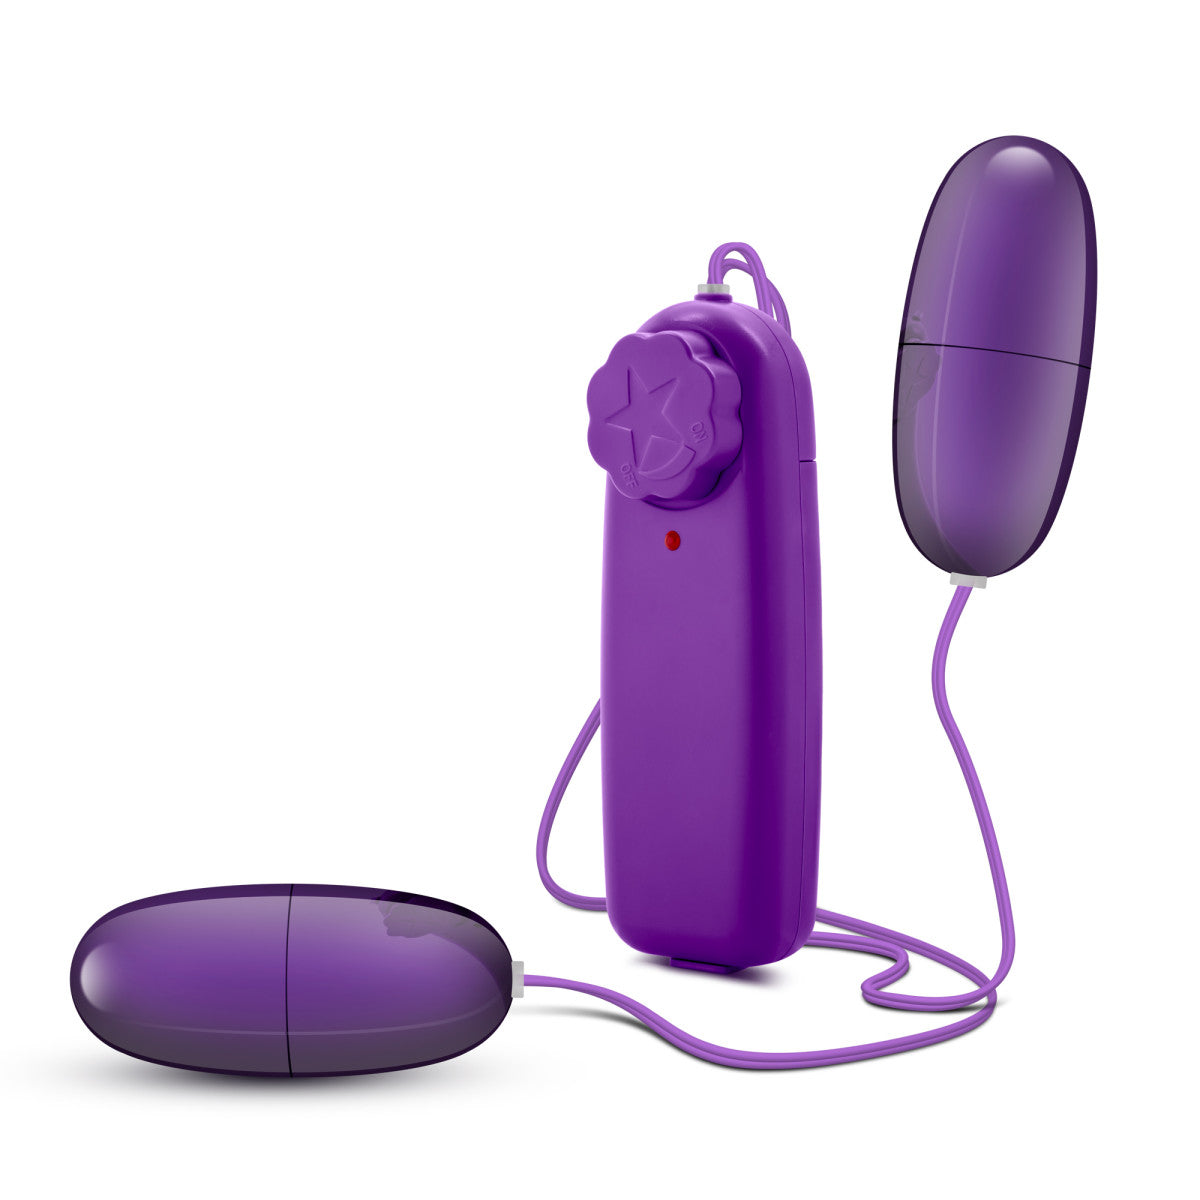 Two smooth purple plastic egg shaped bullets connected to a purple plastic controller by thin purple cables. Twist dial on controller to control intensity for both bullets at once. Additional images show alternate angles.